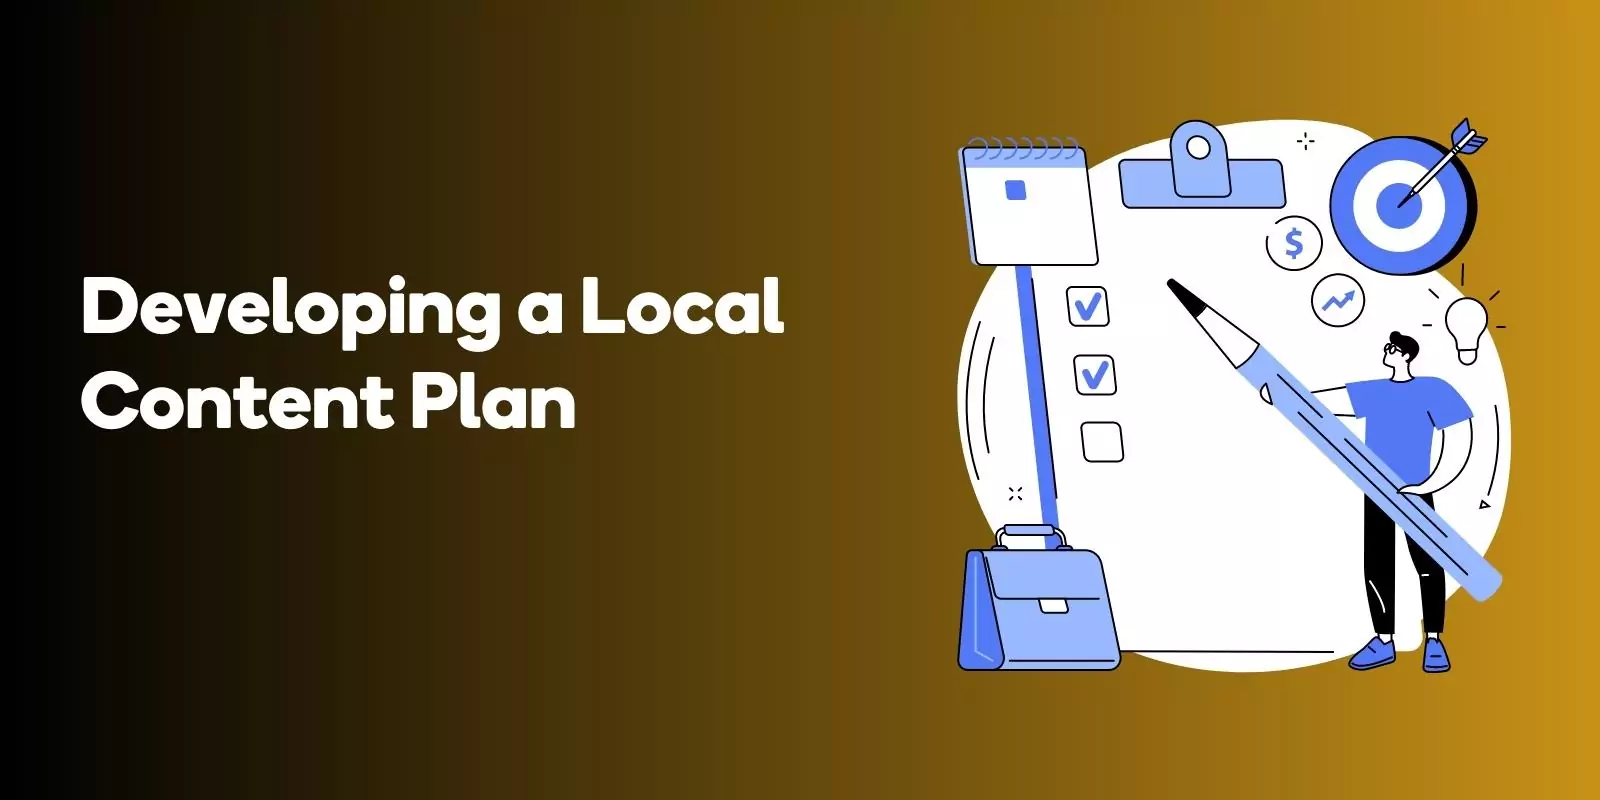 Developing a Local Content Plan